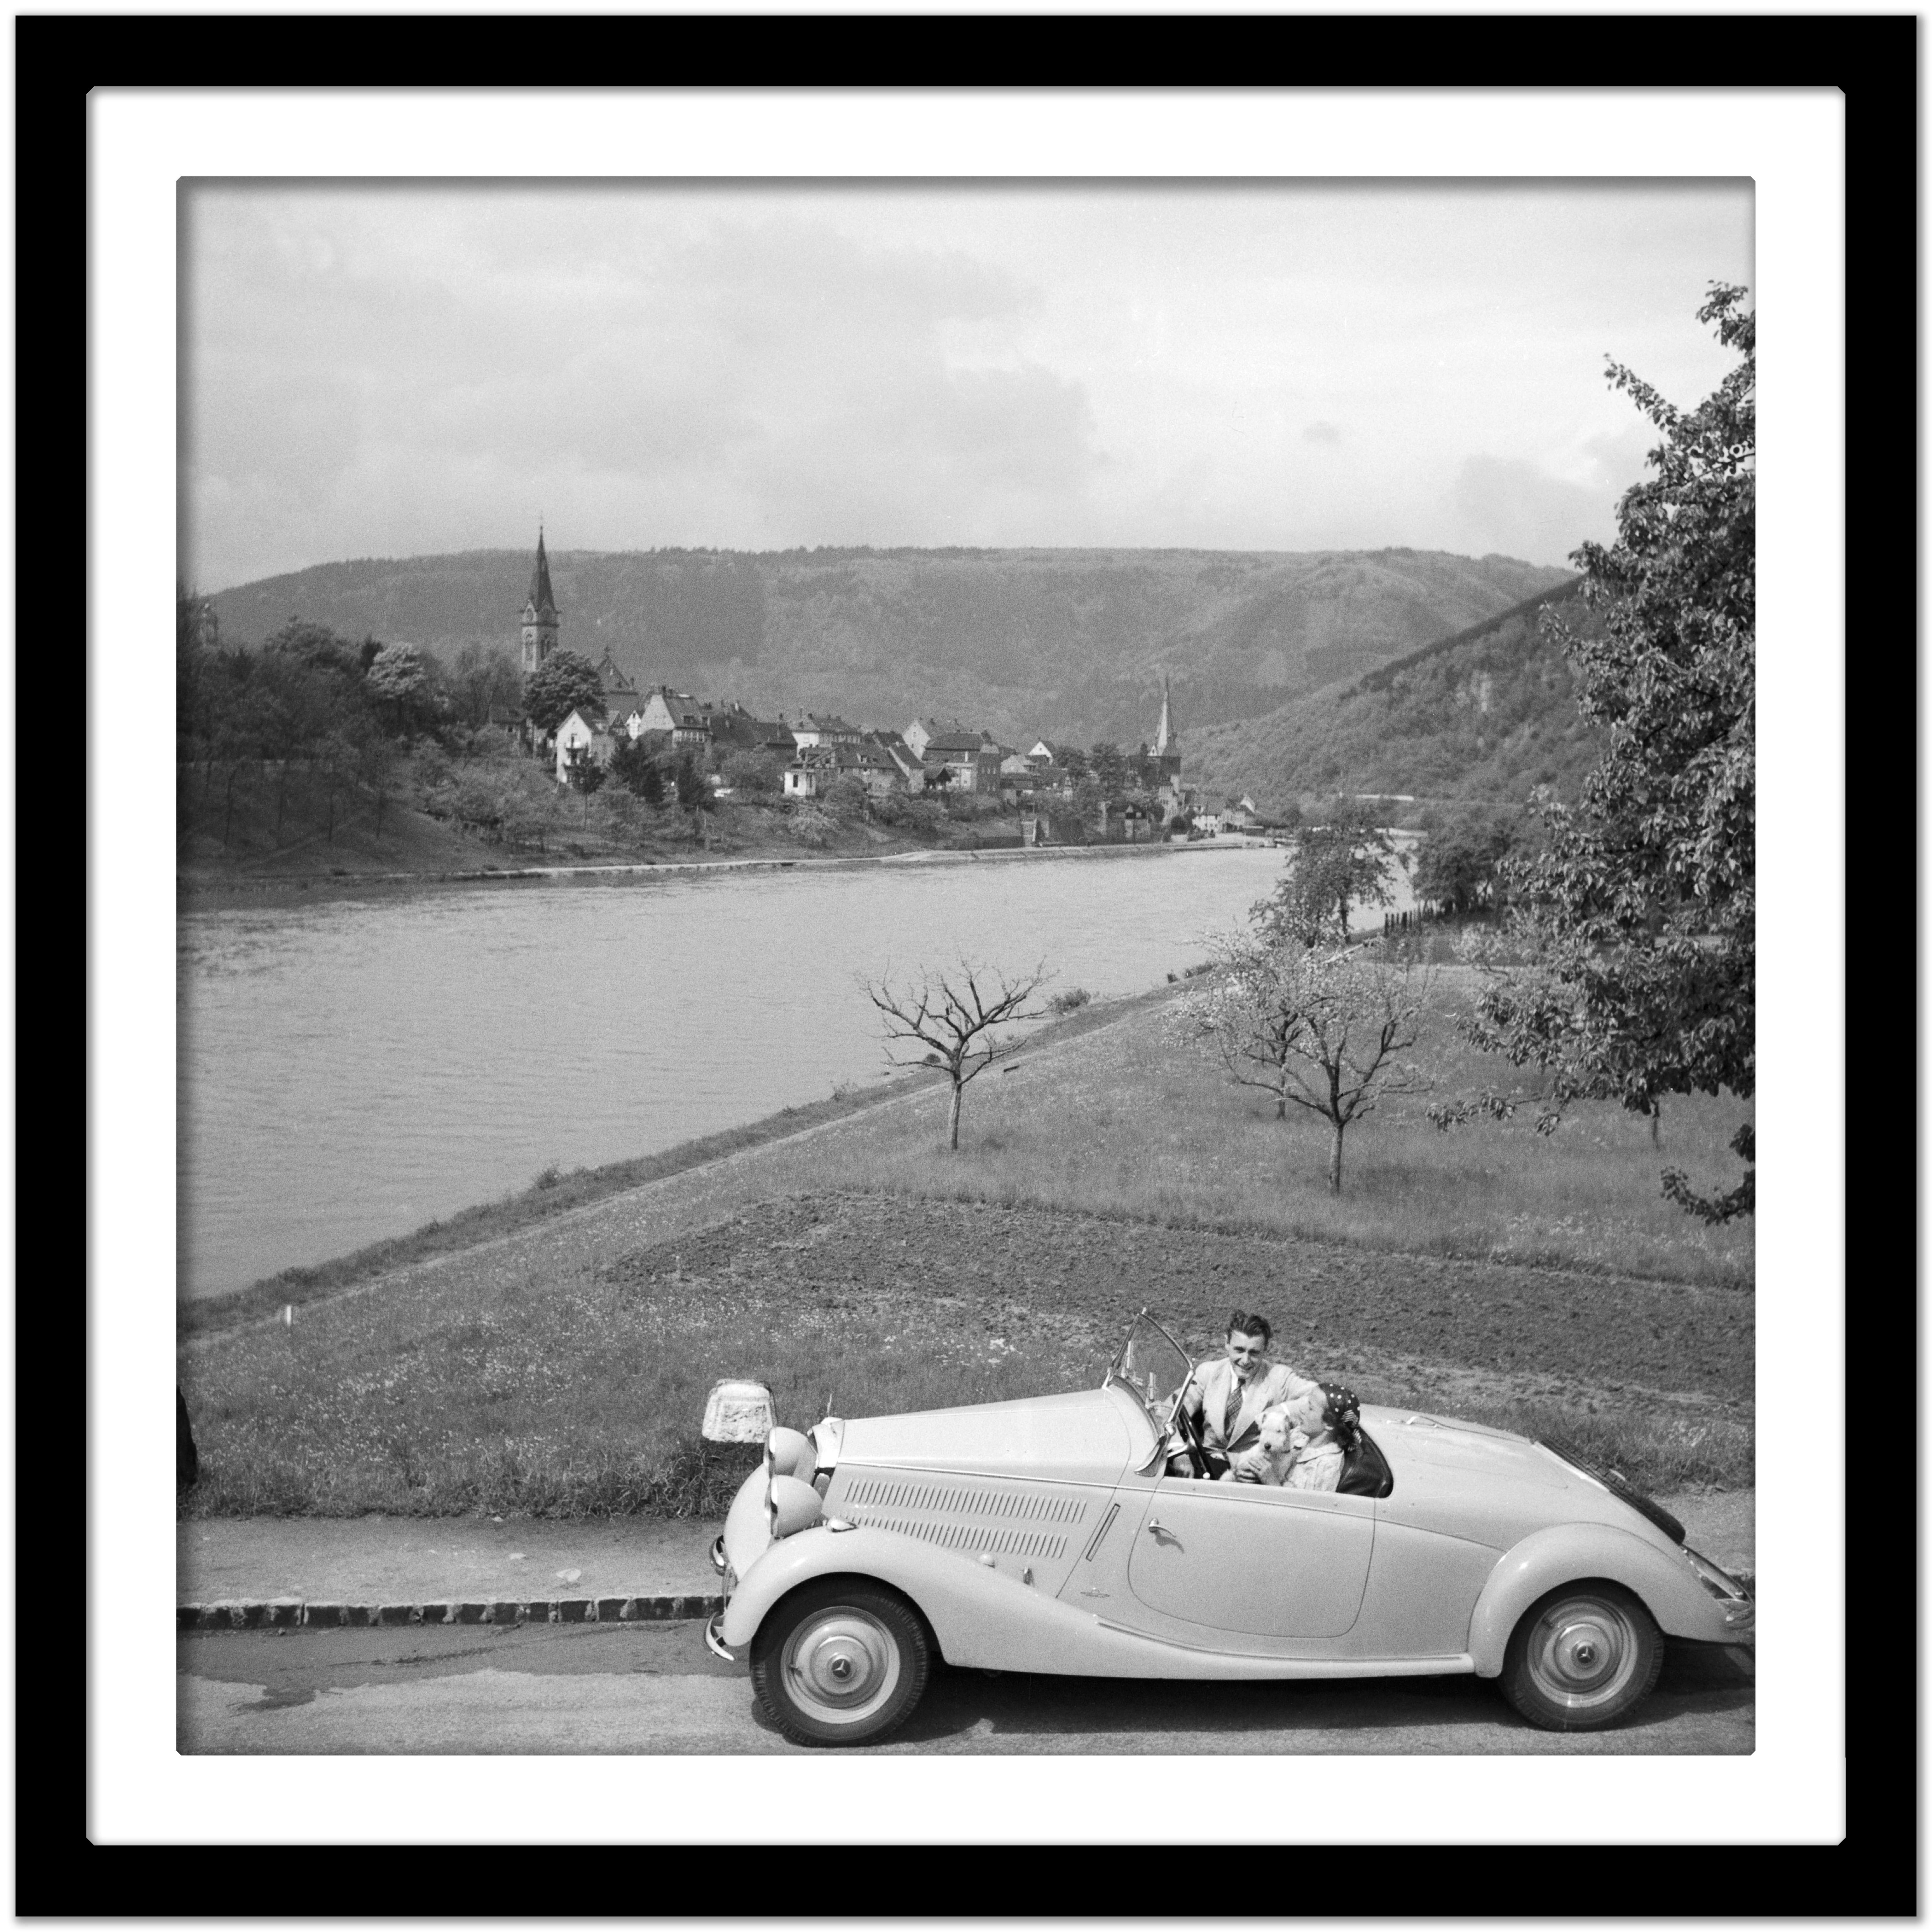 Giong to Neckargemuend by car near Heidelberg, Germany 1936, Printed Later  - Gray Black and White Photograph by Karl Heinrich Lämmel